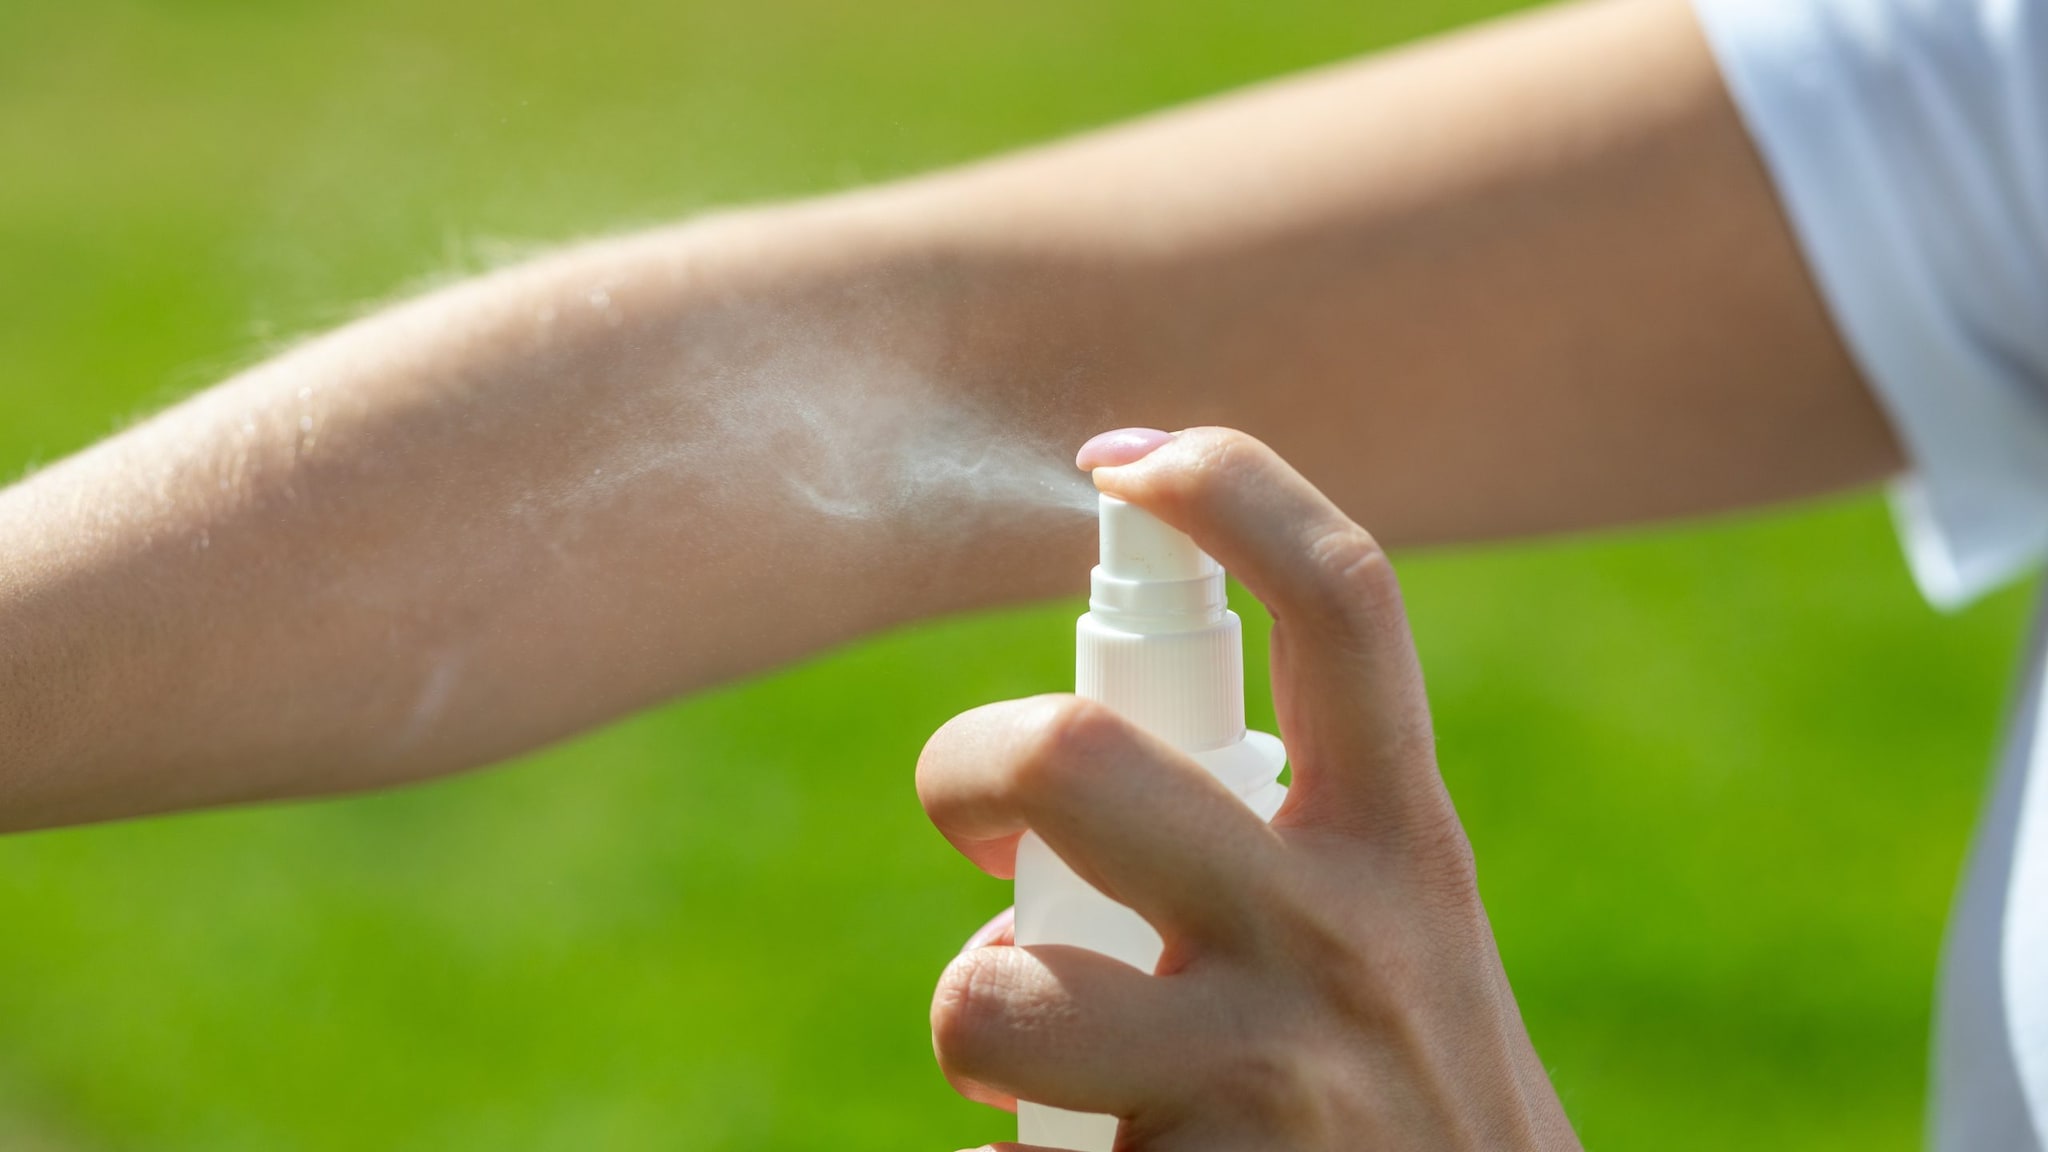 Person applying insect repellent to their arm